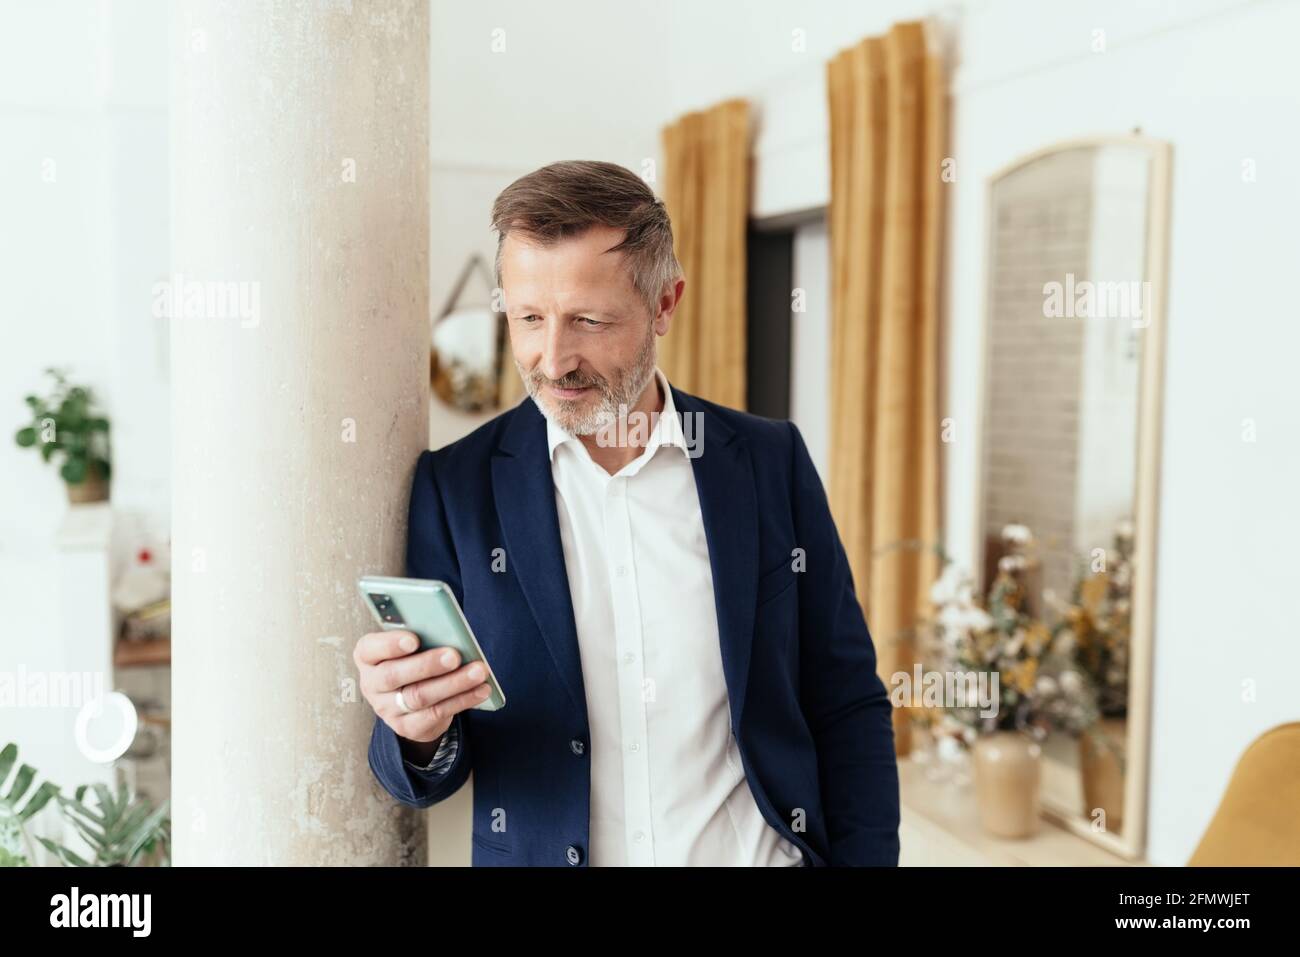 Relaxed businessman in jacket standing leaning against a pillar reading a phone message on his smartphone with a thoughtful look of concentration indo Stock Photo